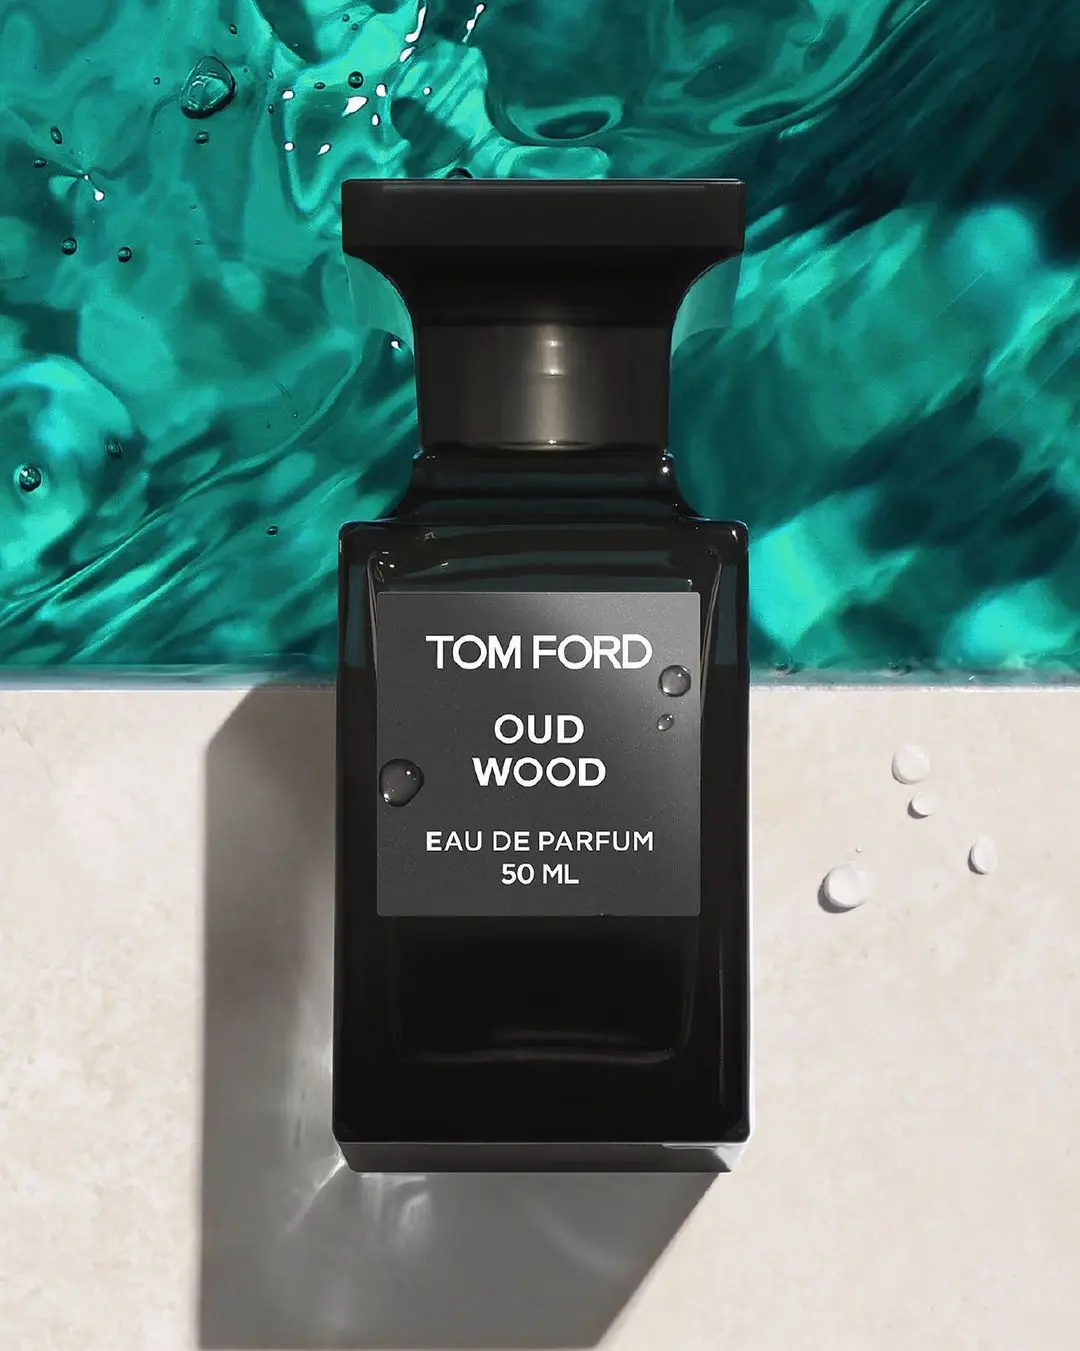 7 Great Smelling Colognes to Get Your Man ...